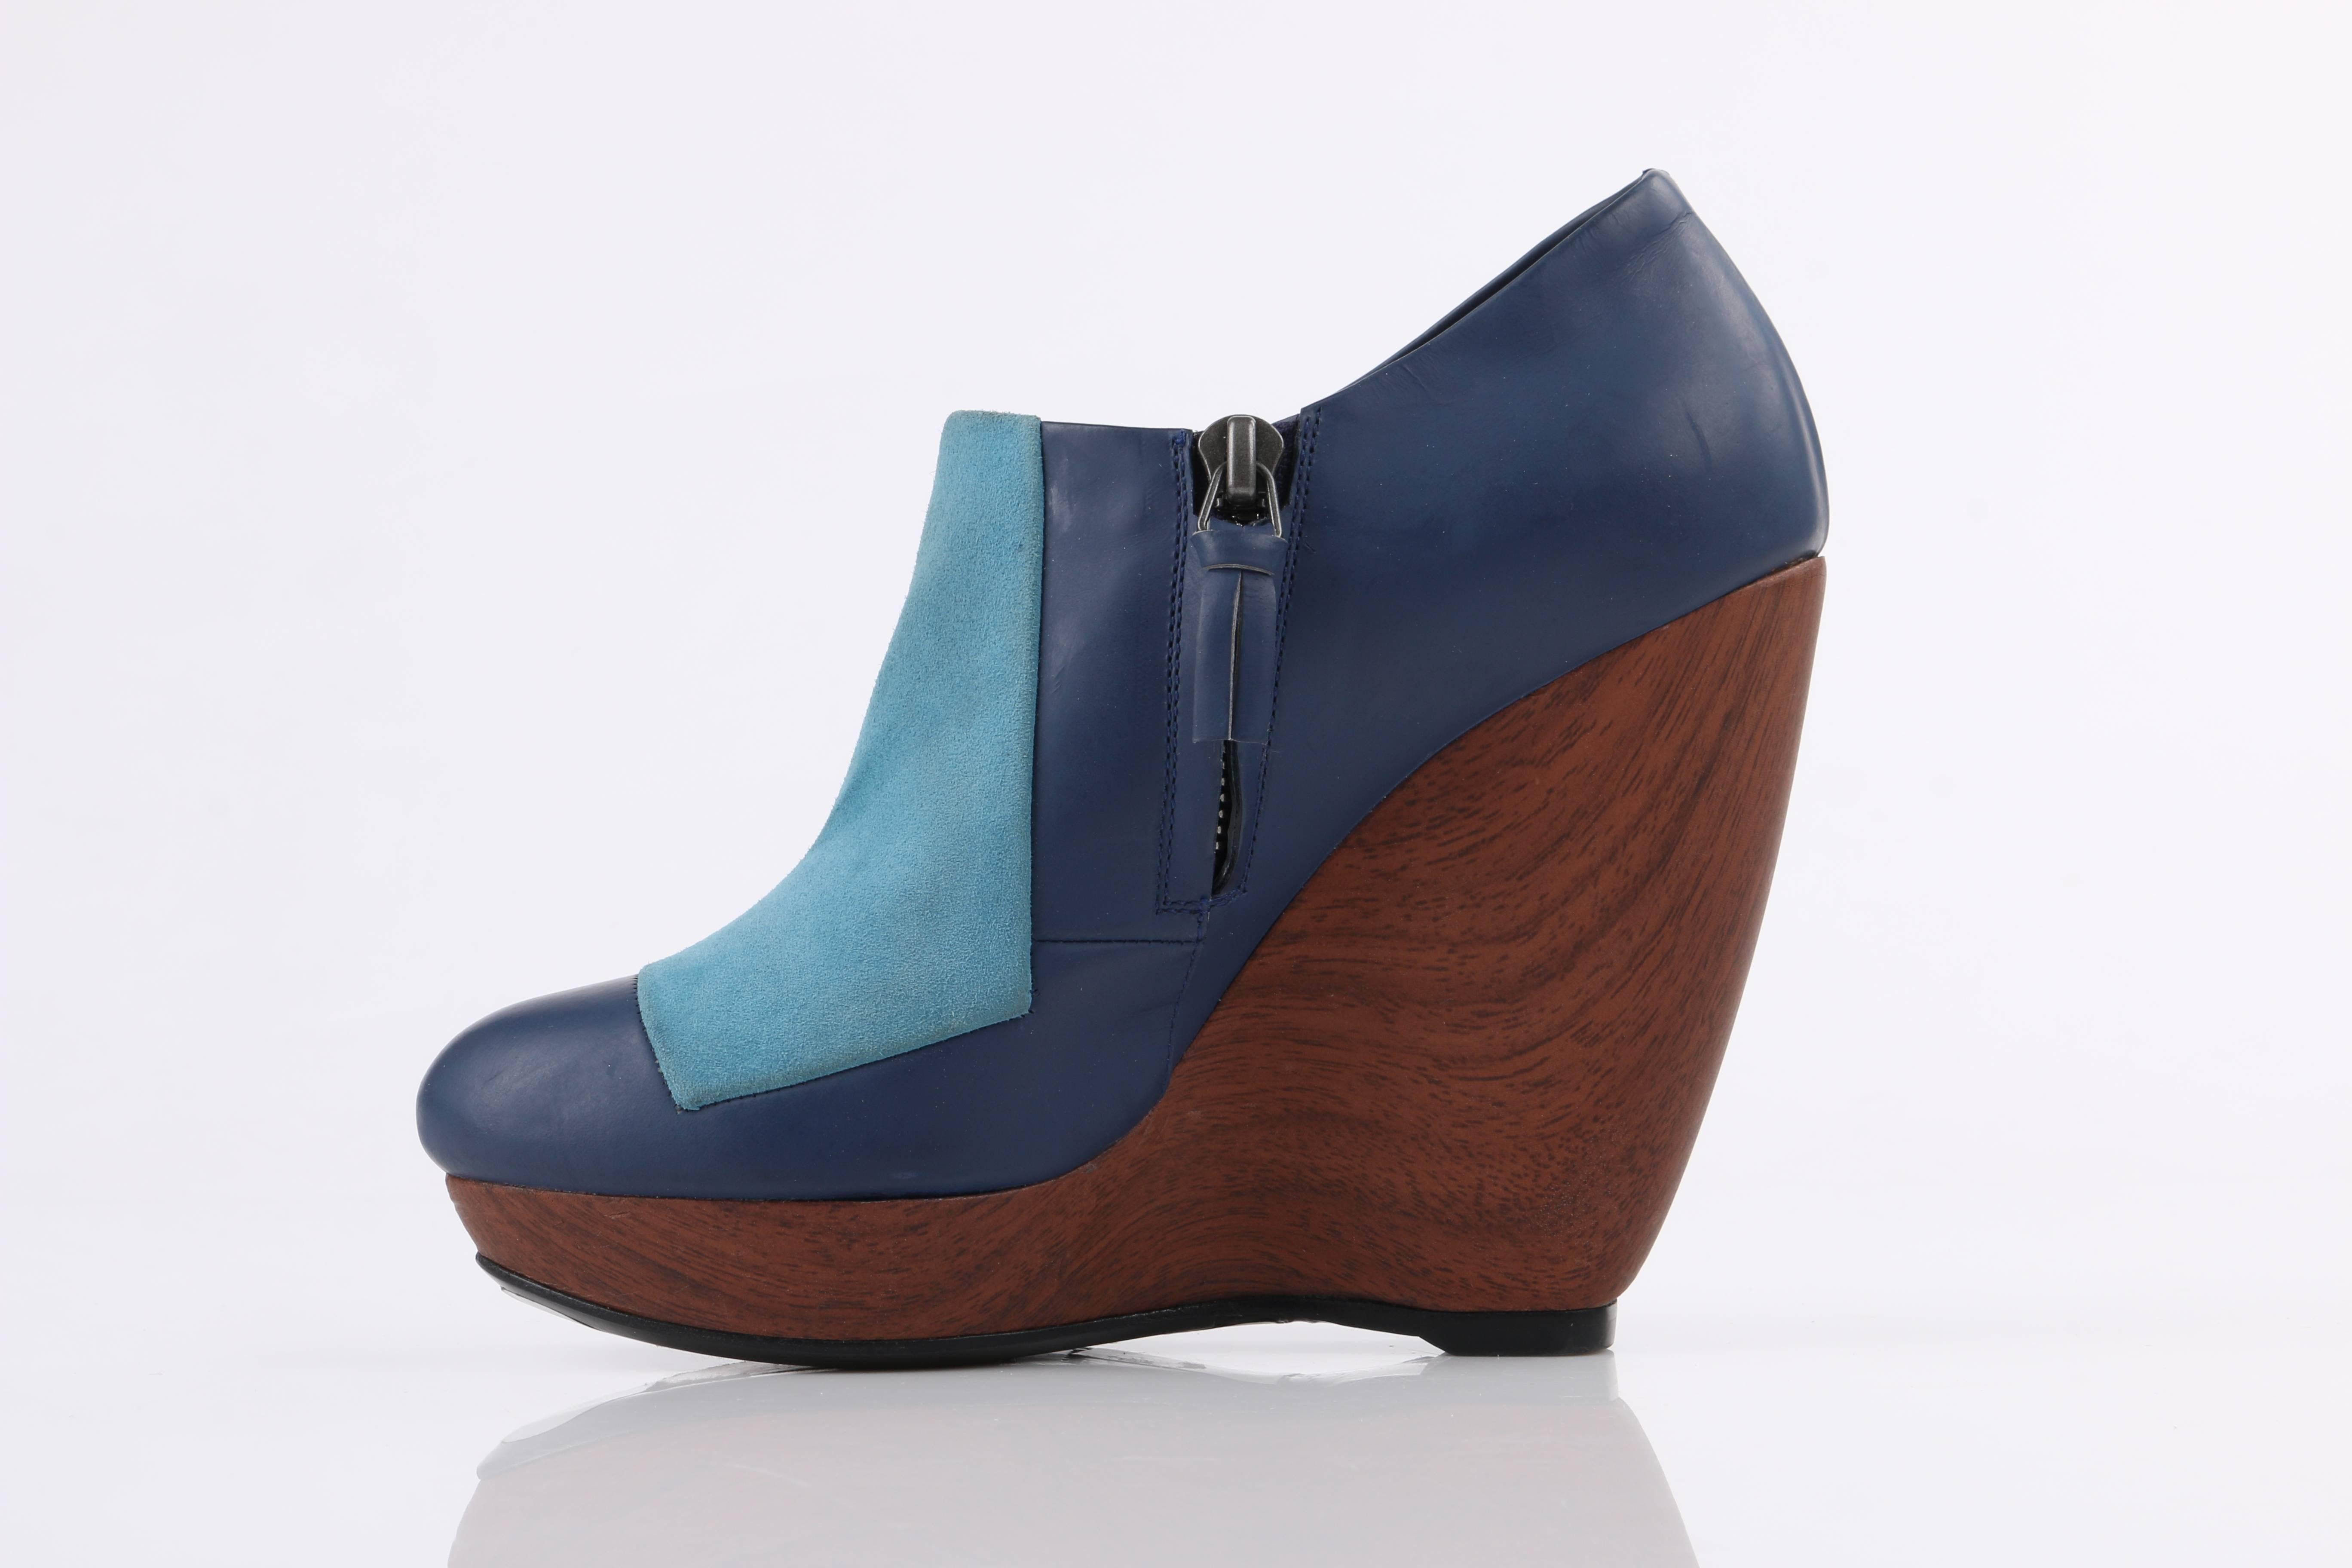 Balenciaga light on dark blue colorblock wooden wedge heels. Blue matte finish genuine leather upper with light blue suede front panel. Side zip closure with navy leather zipper pull. Leather lined. Brown wooden platform wedge. Black leather sole.